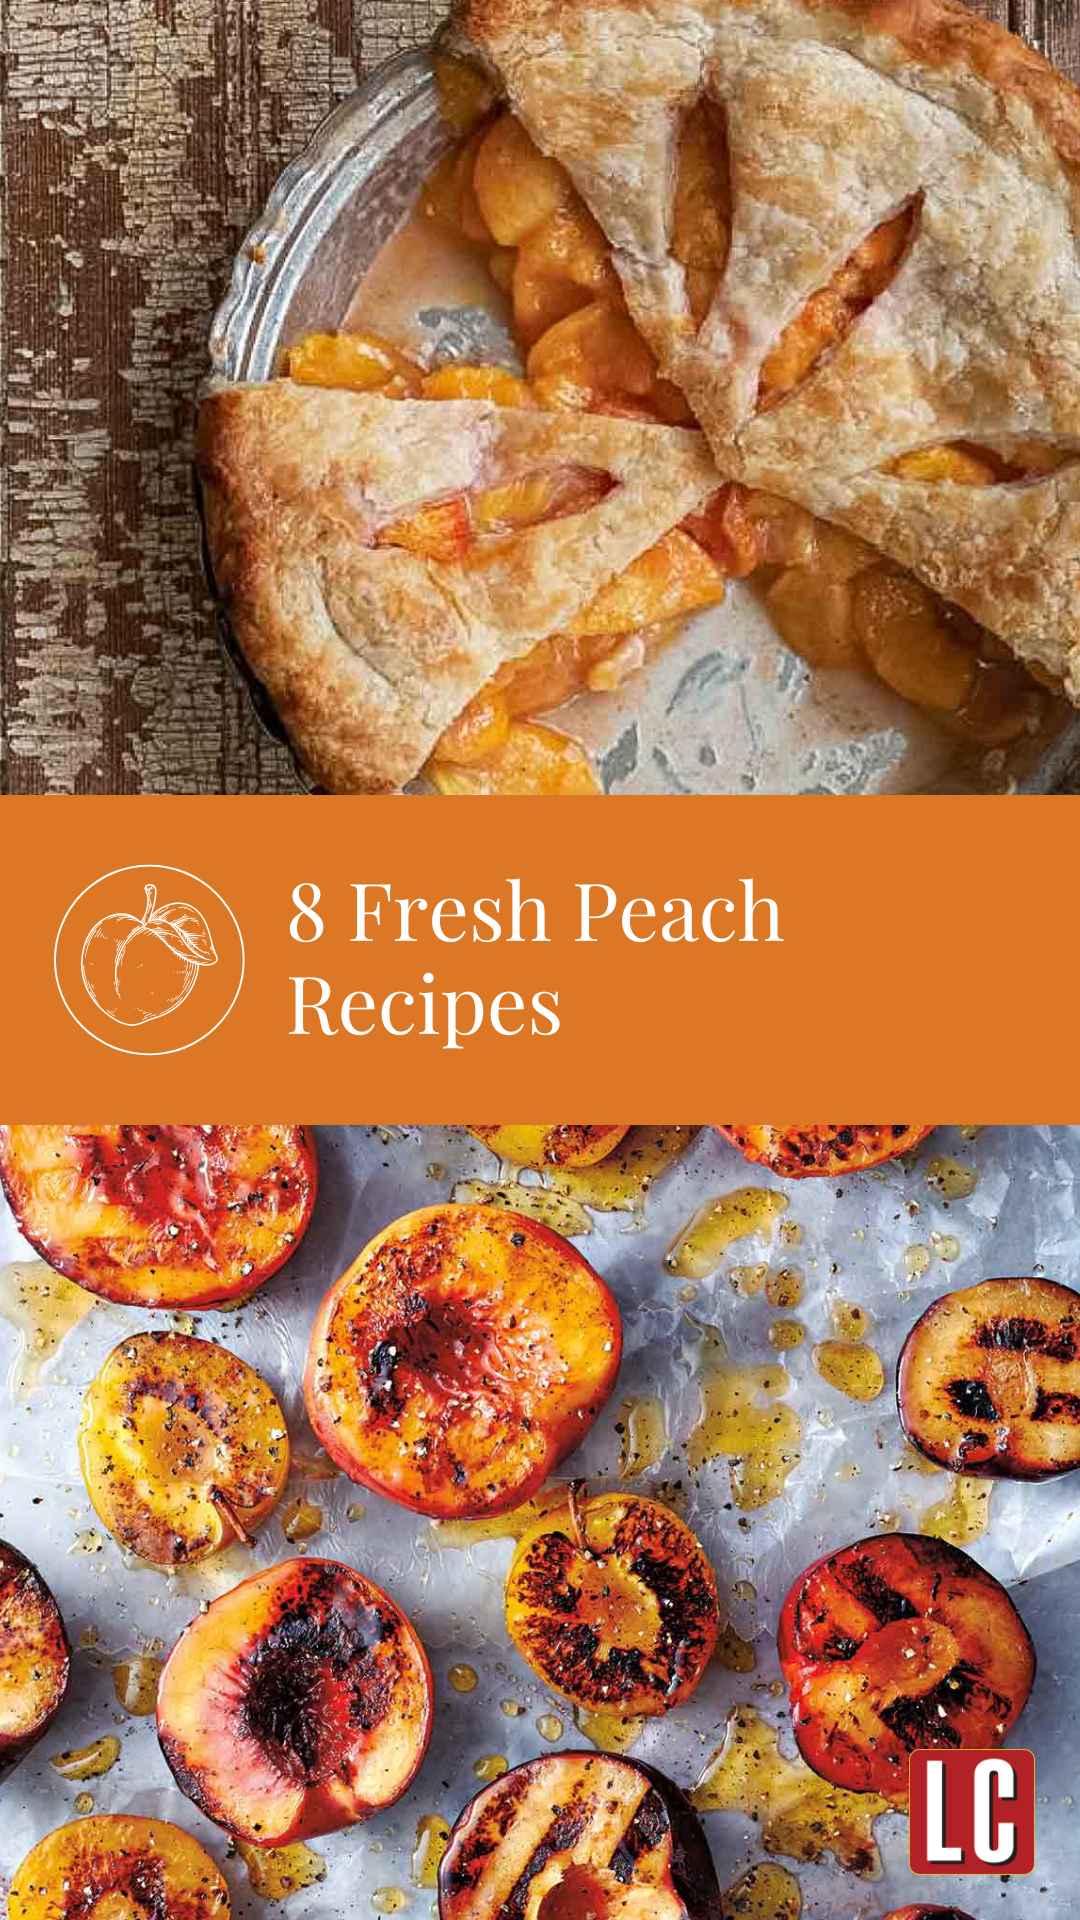 A fresh peach pie with a few slices missing and grilled peach halves on a sheet of wax paper.